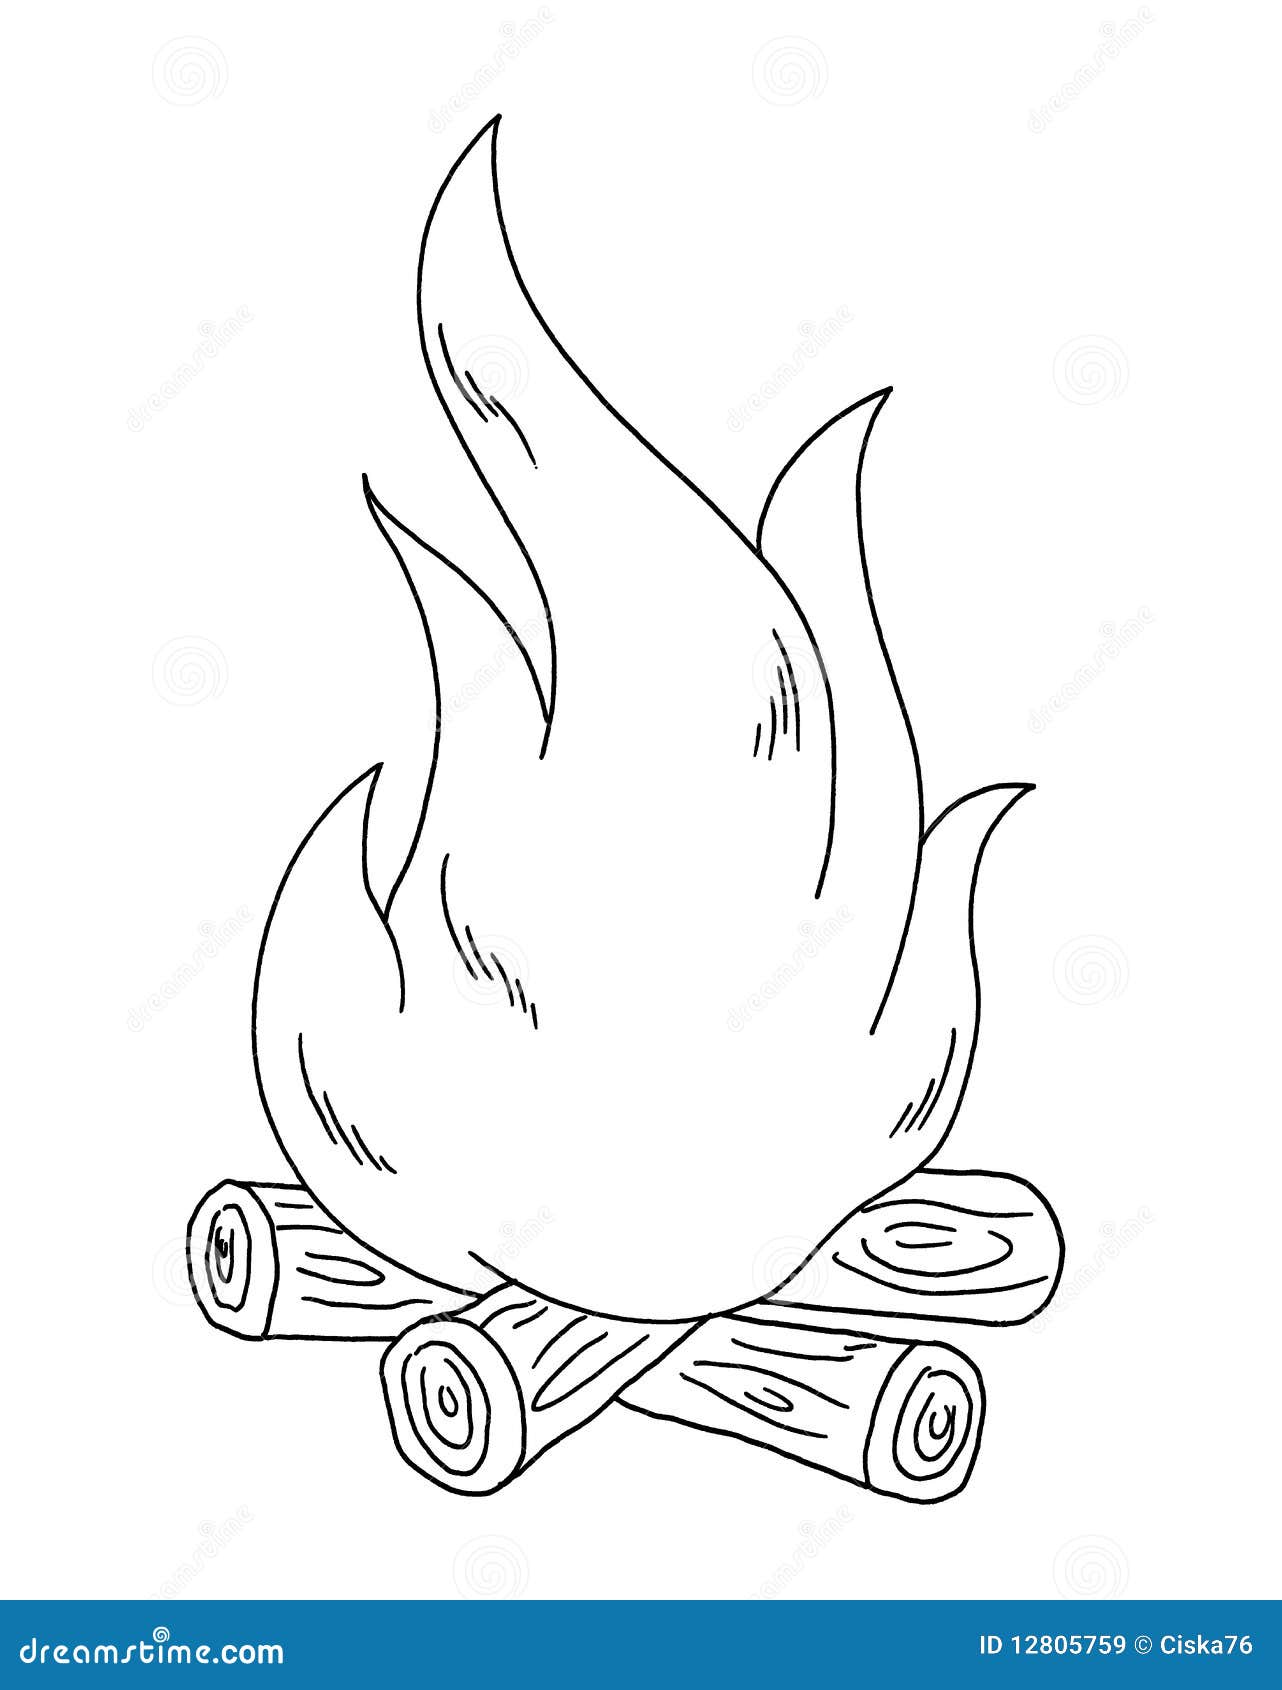 Featured image of post Fire Clipart Black And White Free - Flames psd ( 8 layers ) + 8 png images for free download.